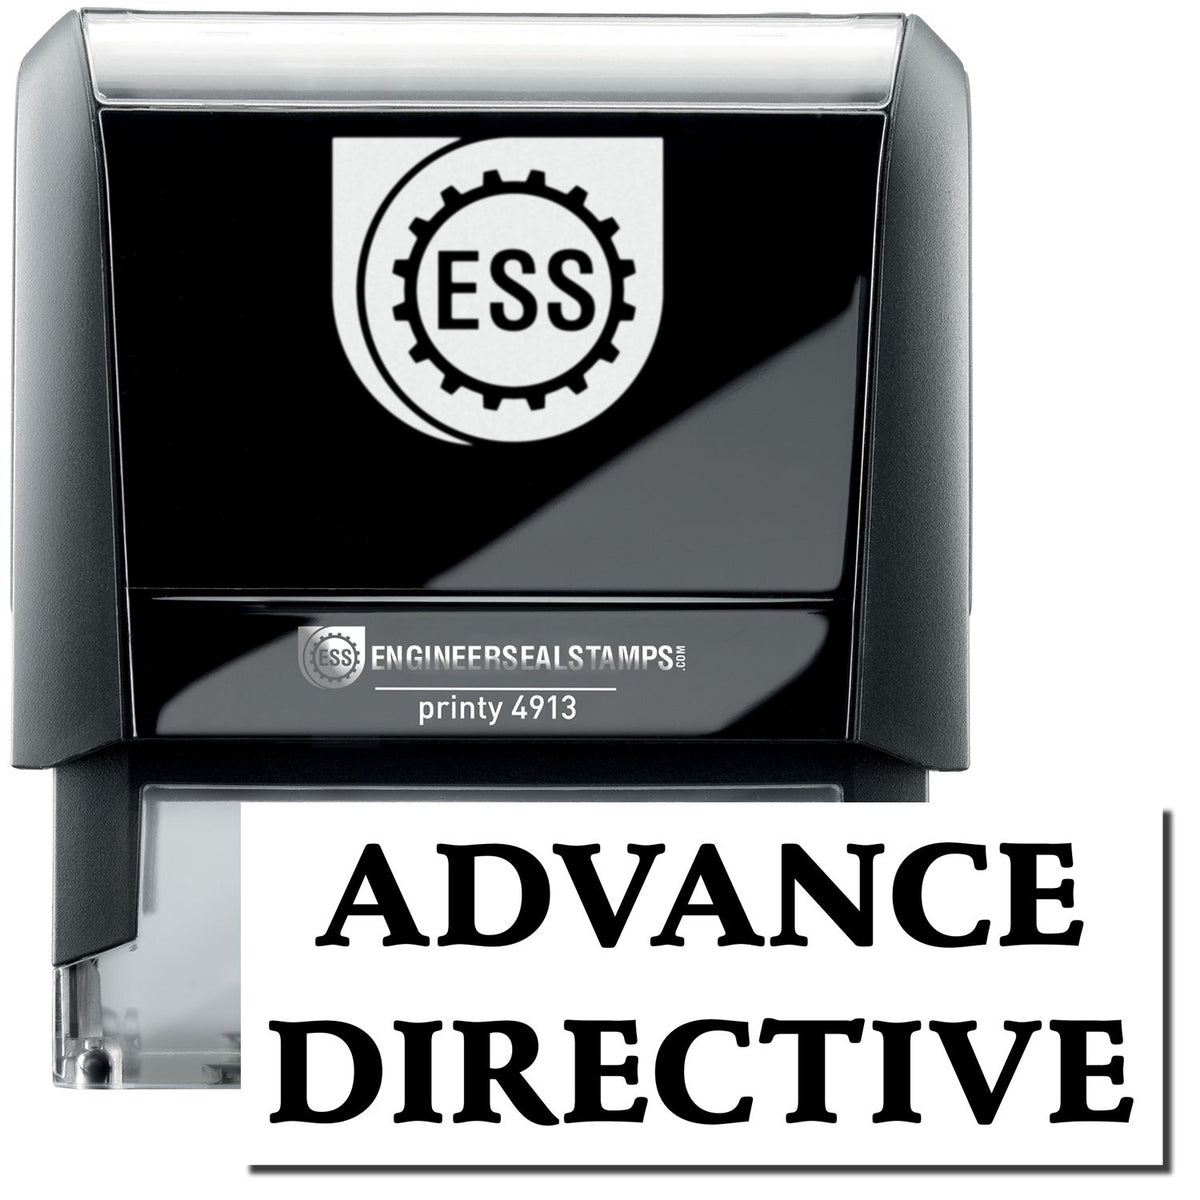 A self-inking stamp with a stamped image showing how the text &quot;ADVANCE DIRECTIVE&quot; in a large bold font is displayed by it.